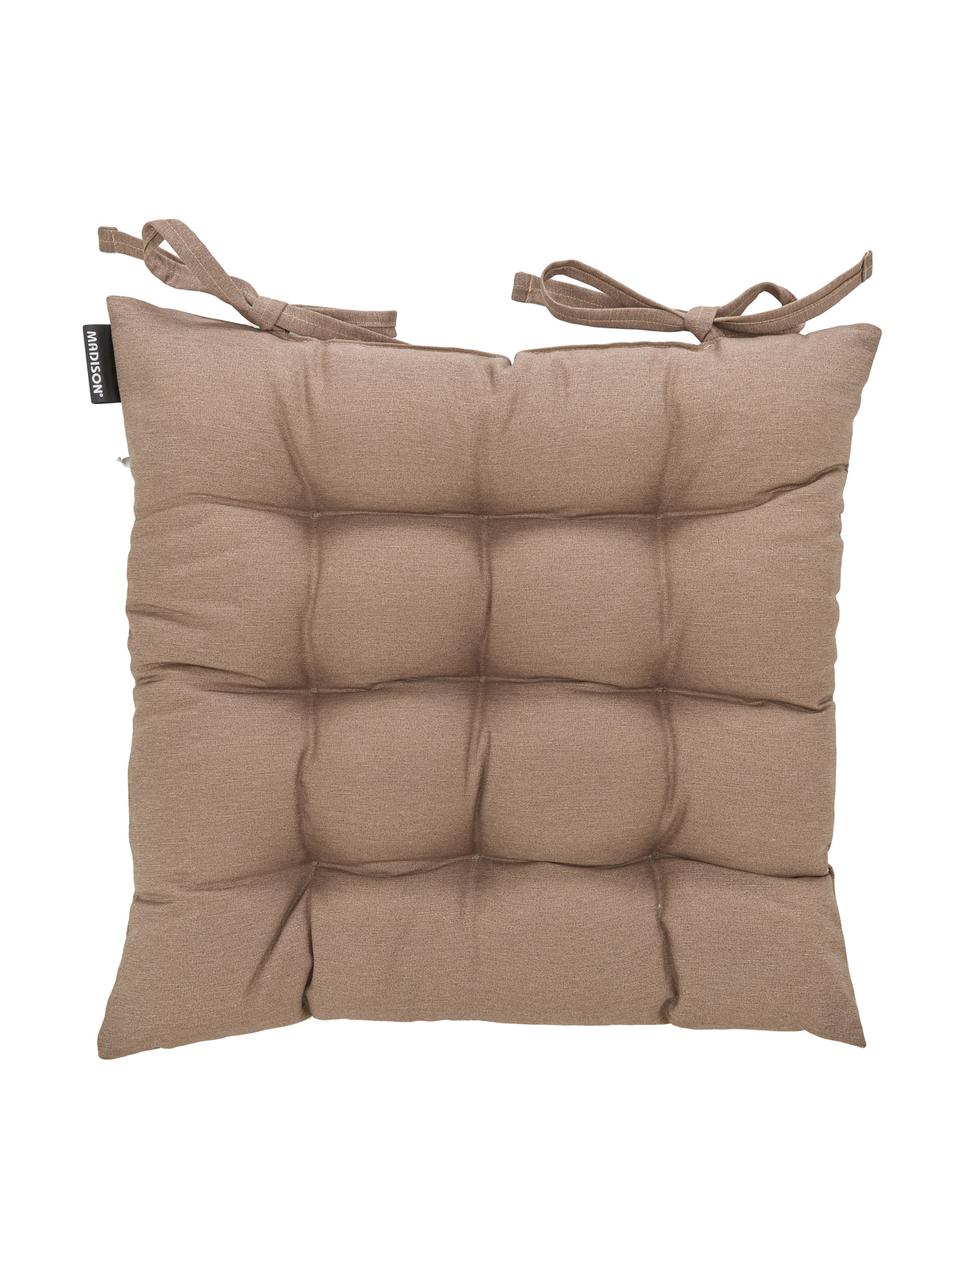 Coussin de chaise taupe Panama, Taupe, larg. 45 x long. 45 cm